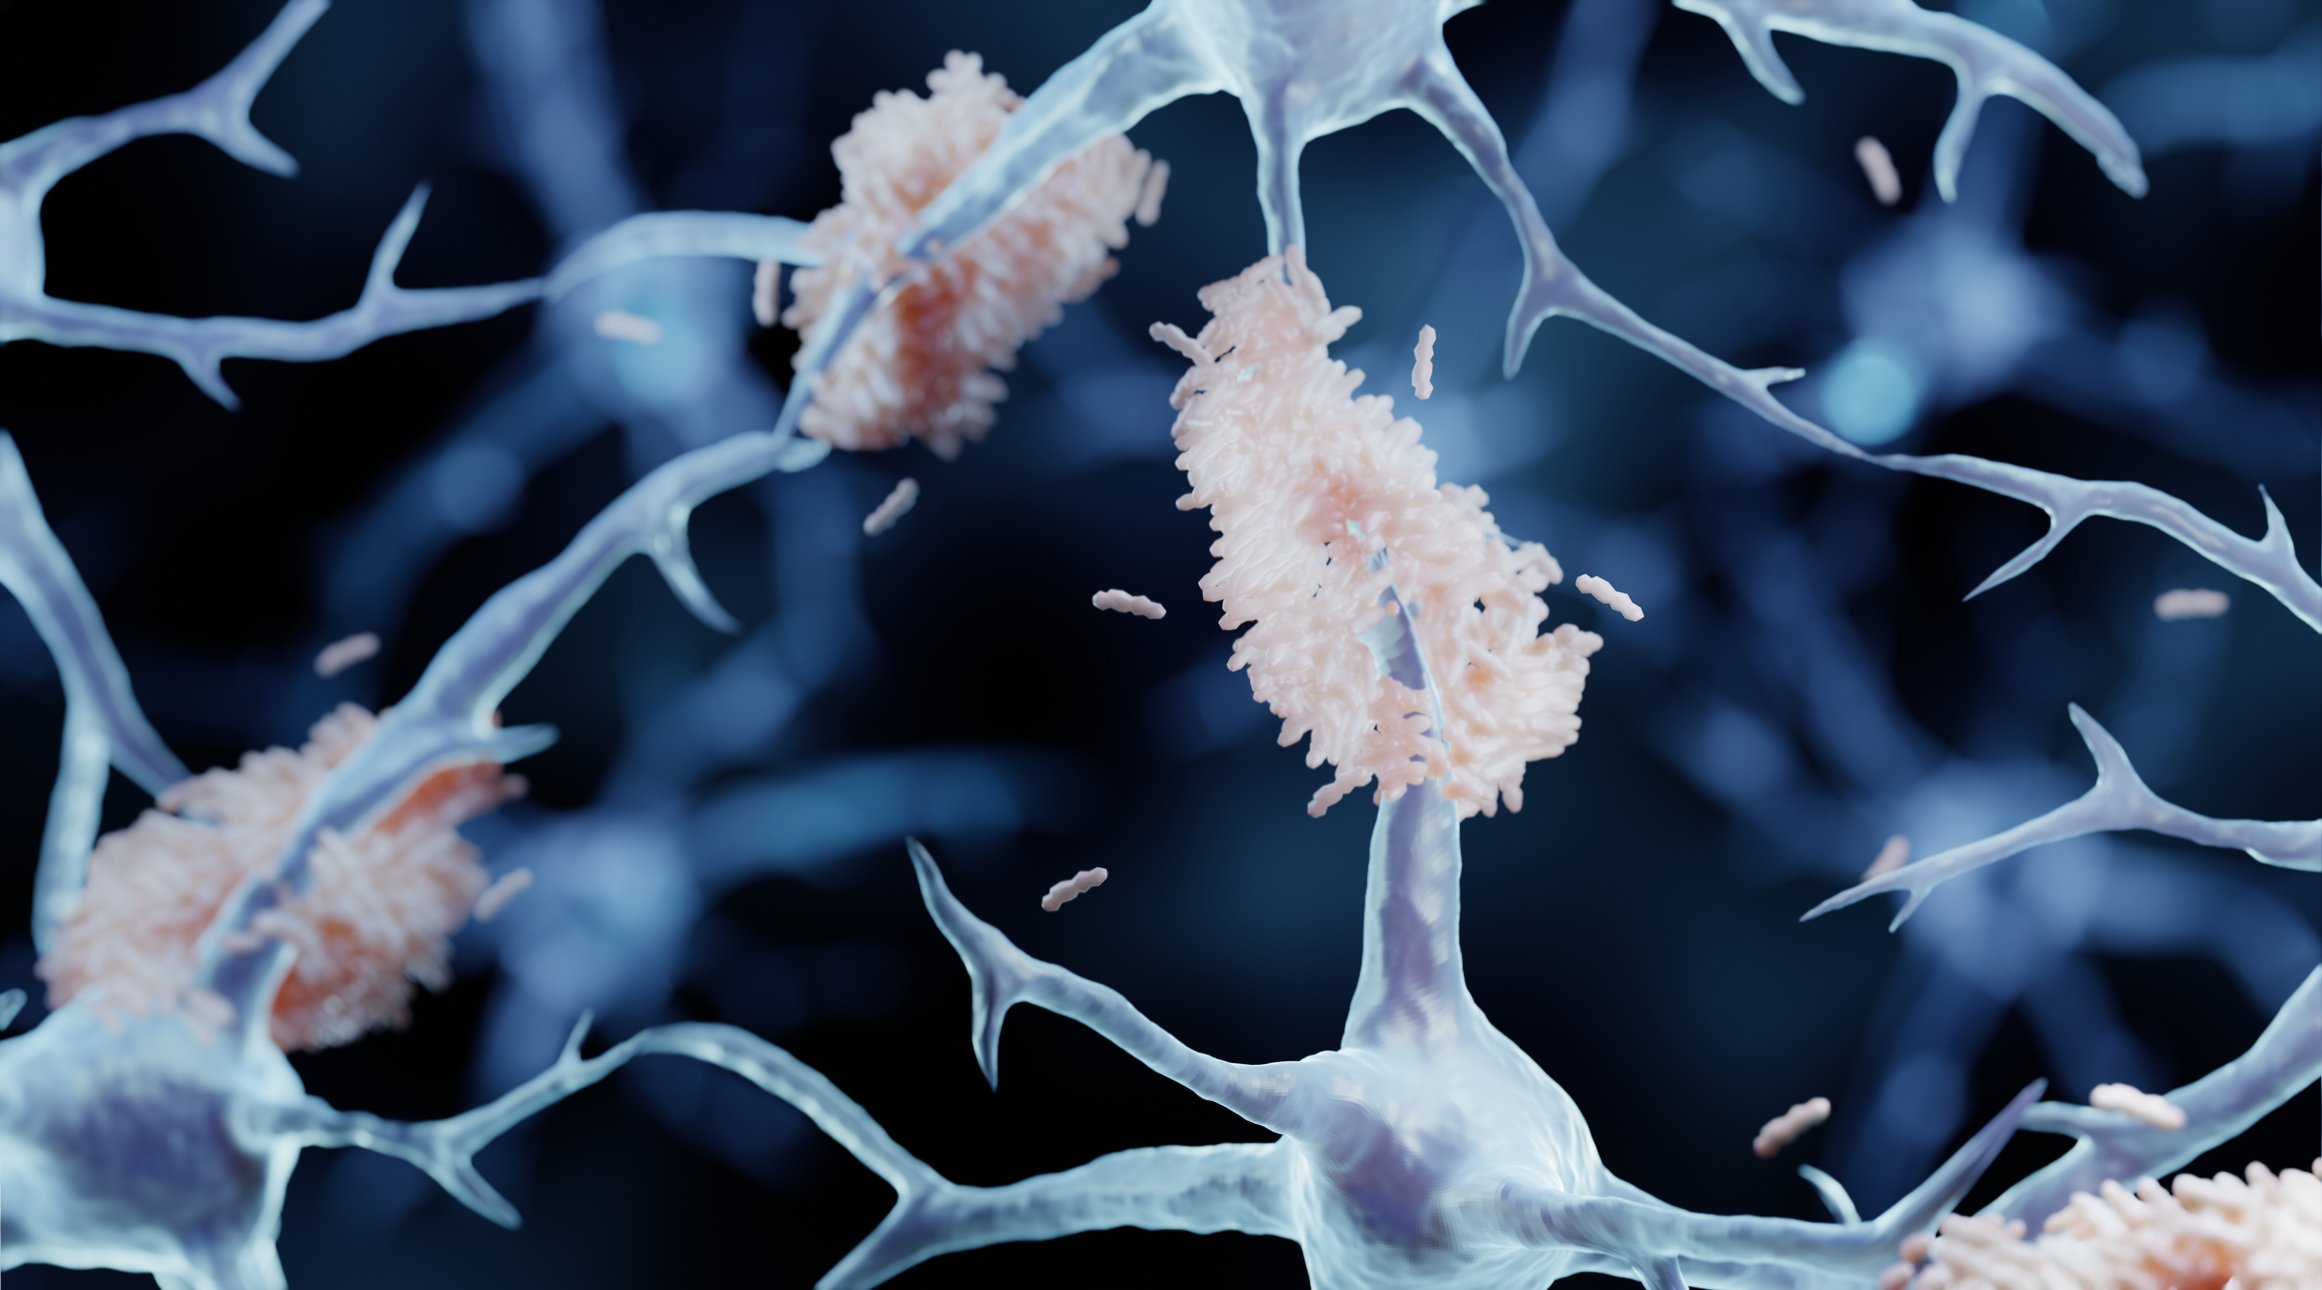 An artists impression of amyloid plaques accumulating on neurons The neurons are translucent white on a blue background wi